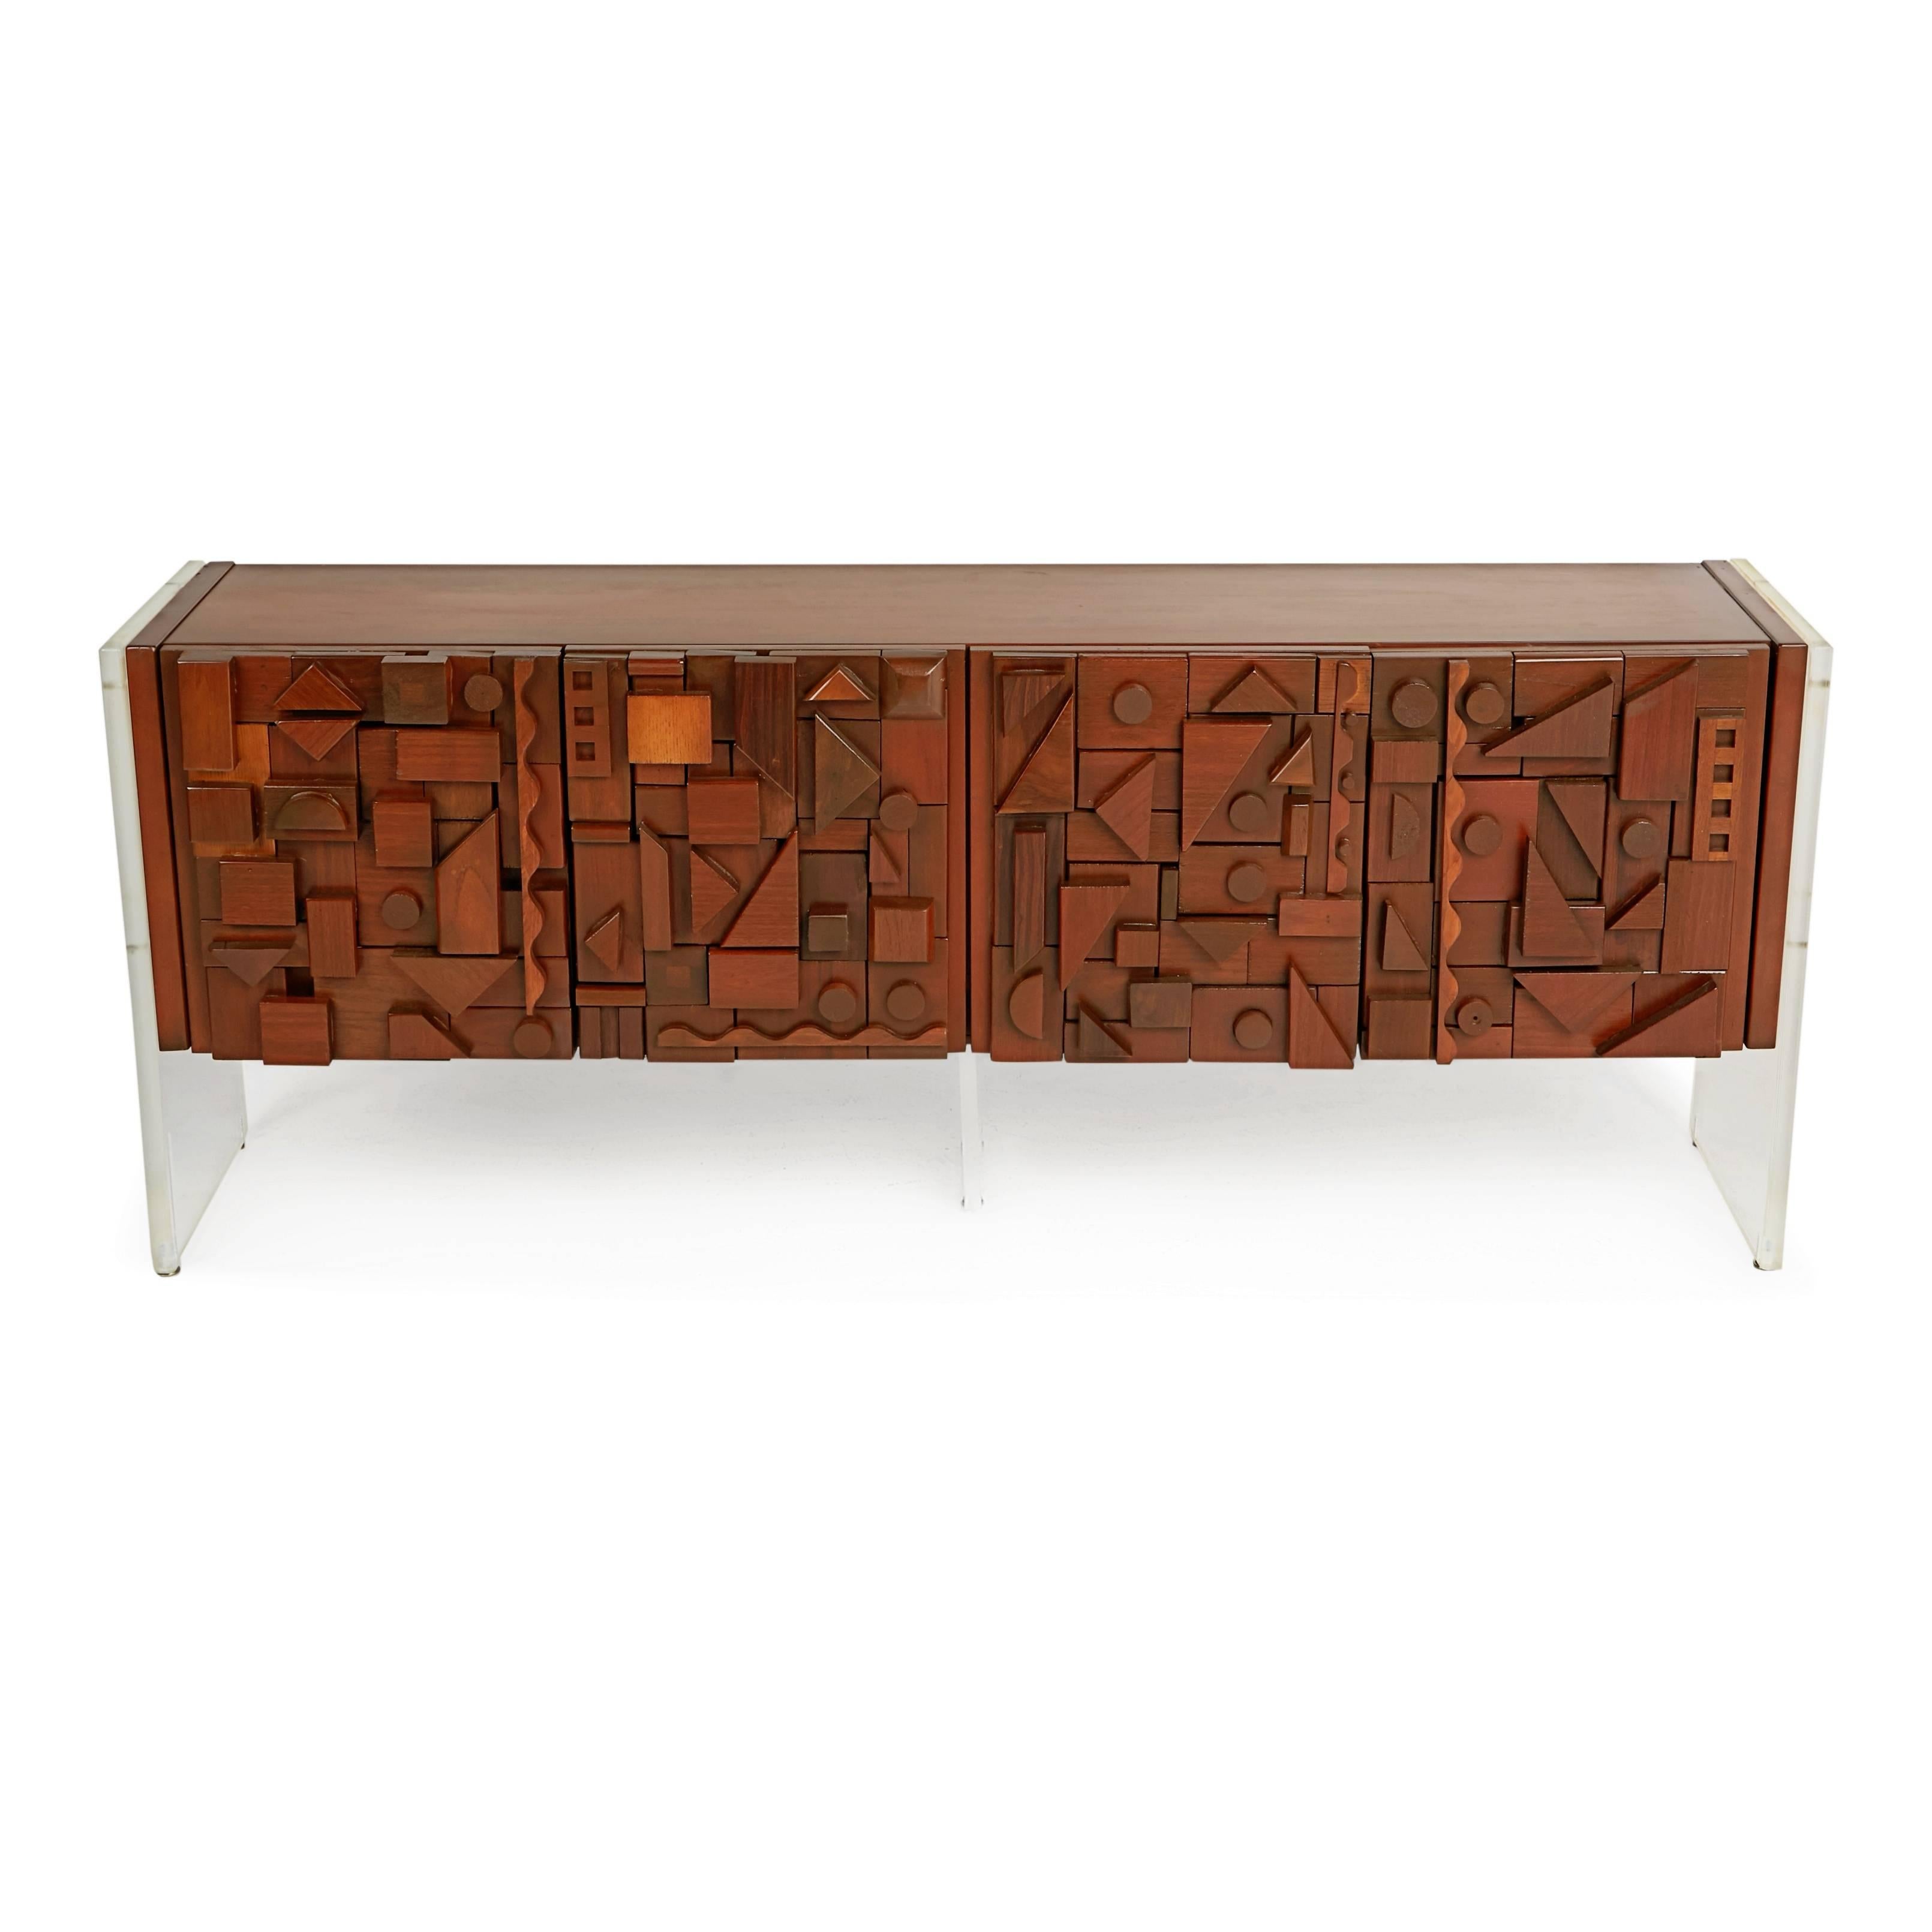 Handcrafted and upcycled Brutalist style credenza designed and fabricated by Los Angeles based artisan Lou Ramirez. Ramirez's work is illustrative of the original designs of the Brutalist era, inspired by Mabel Hutchinson and Evelyn & Jerome